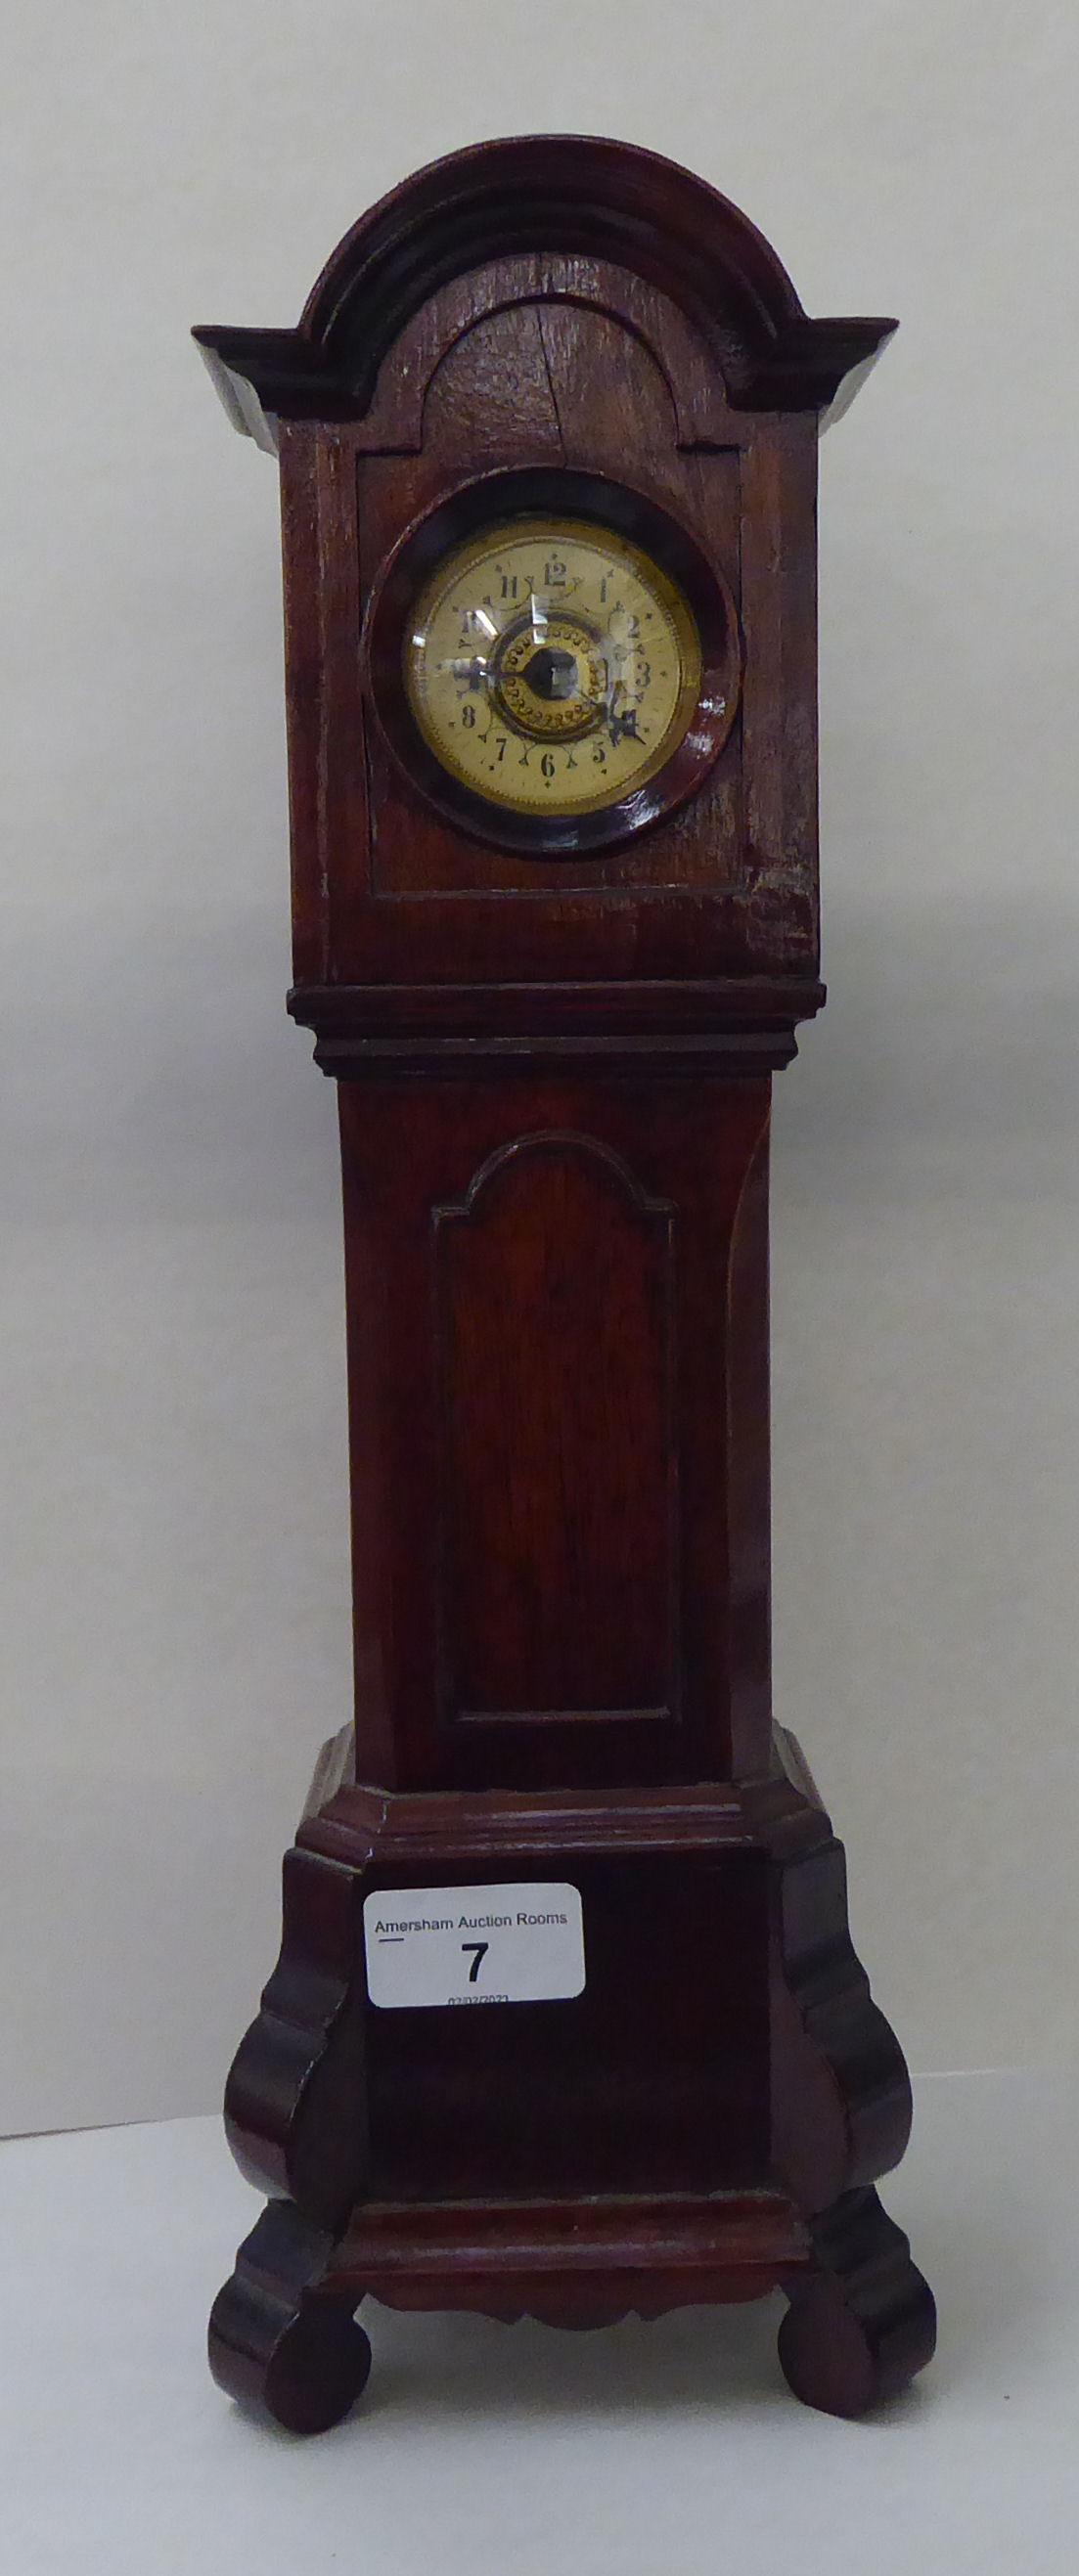 An early 20thC mahogany mantel timepiece, fashioned as a longcase clock with an arched hood and